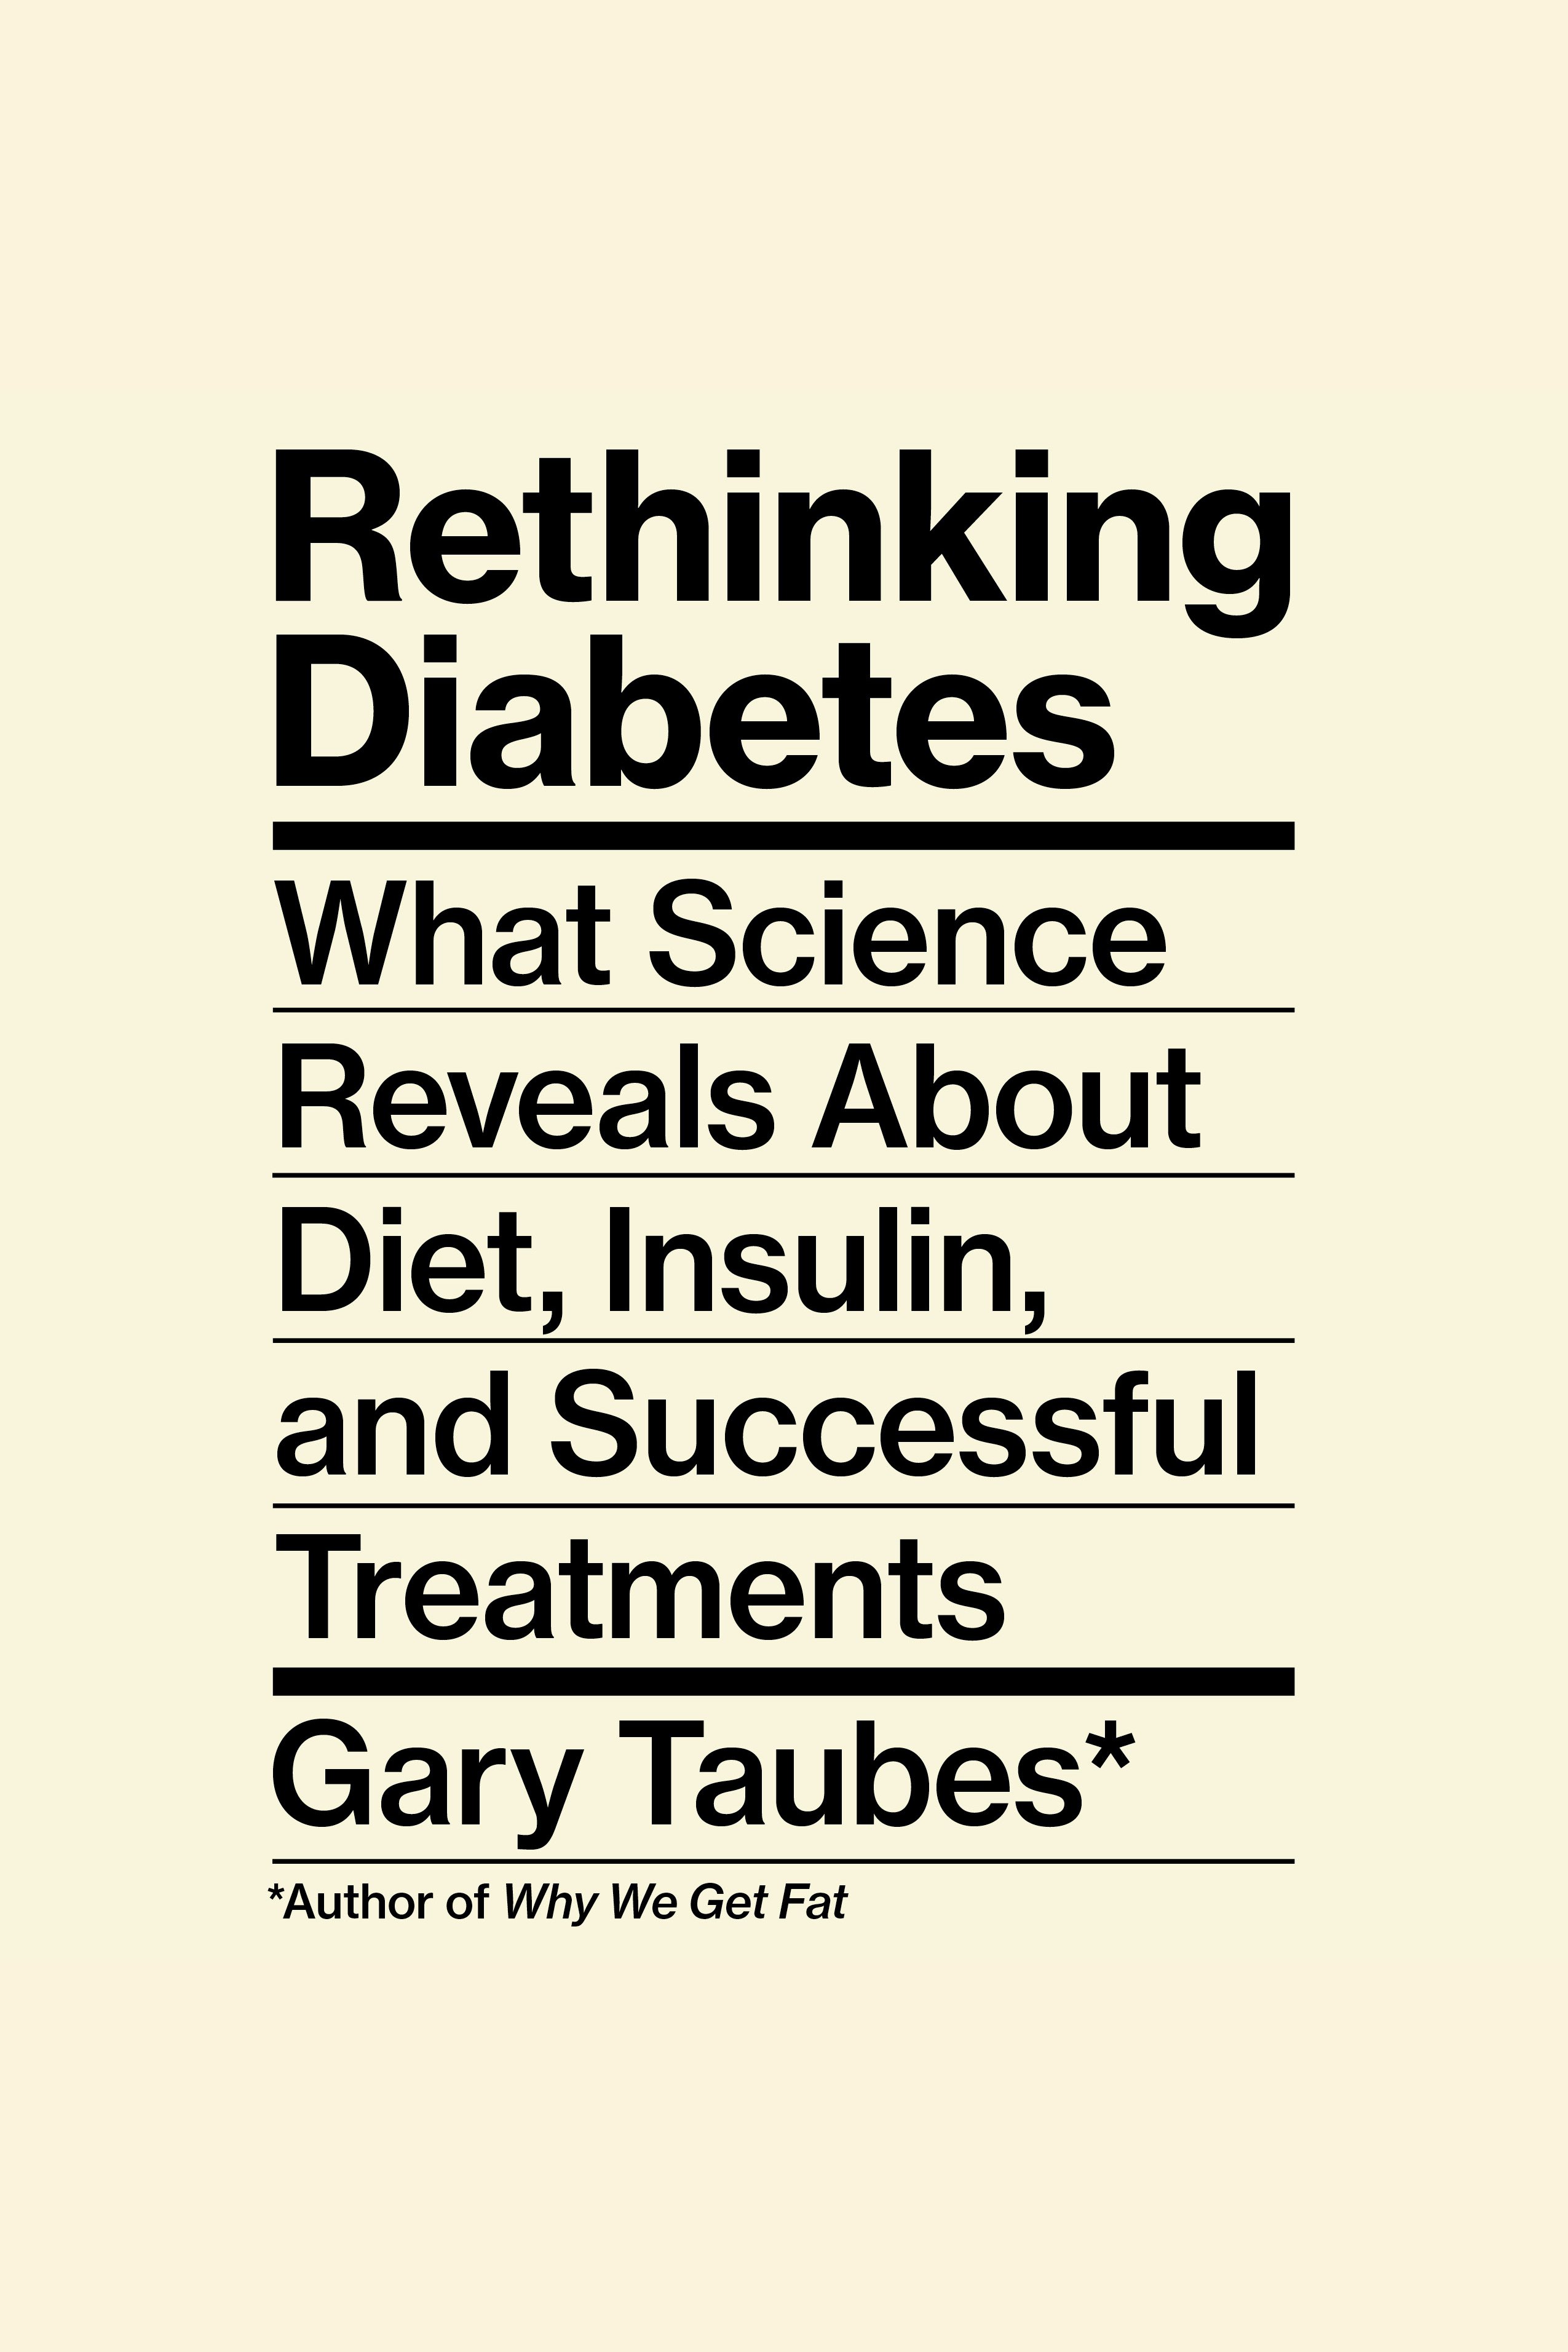 Rethinking Diabetes What Science Reveals About Diet, Insulin, and Successful Treatments cover image